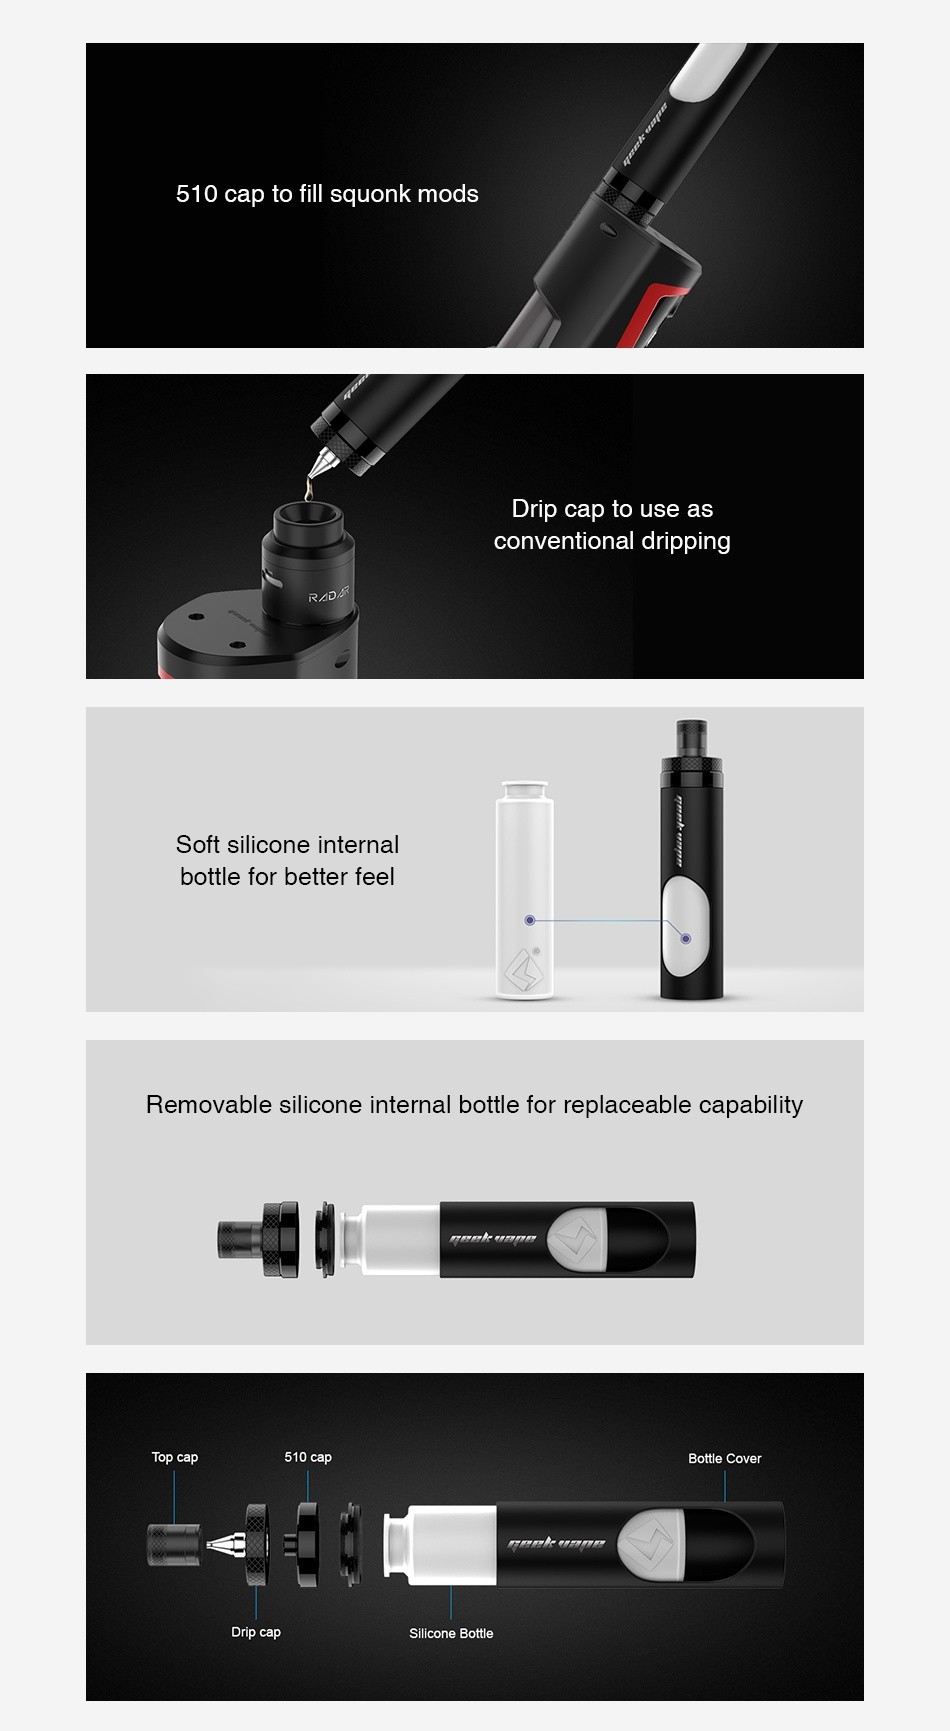 GeekVape Flask Liquid Dispenser Light Version 30ml 510 cap to fill squonk mods Drip cap to use as conventional dripping Soft silicone interna bottle for better feel Removable silicone internal bottle for replaceable capability   510 cap Bottle Cover Silicone Bottle